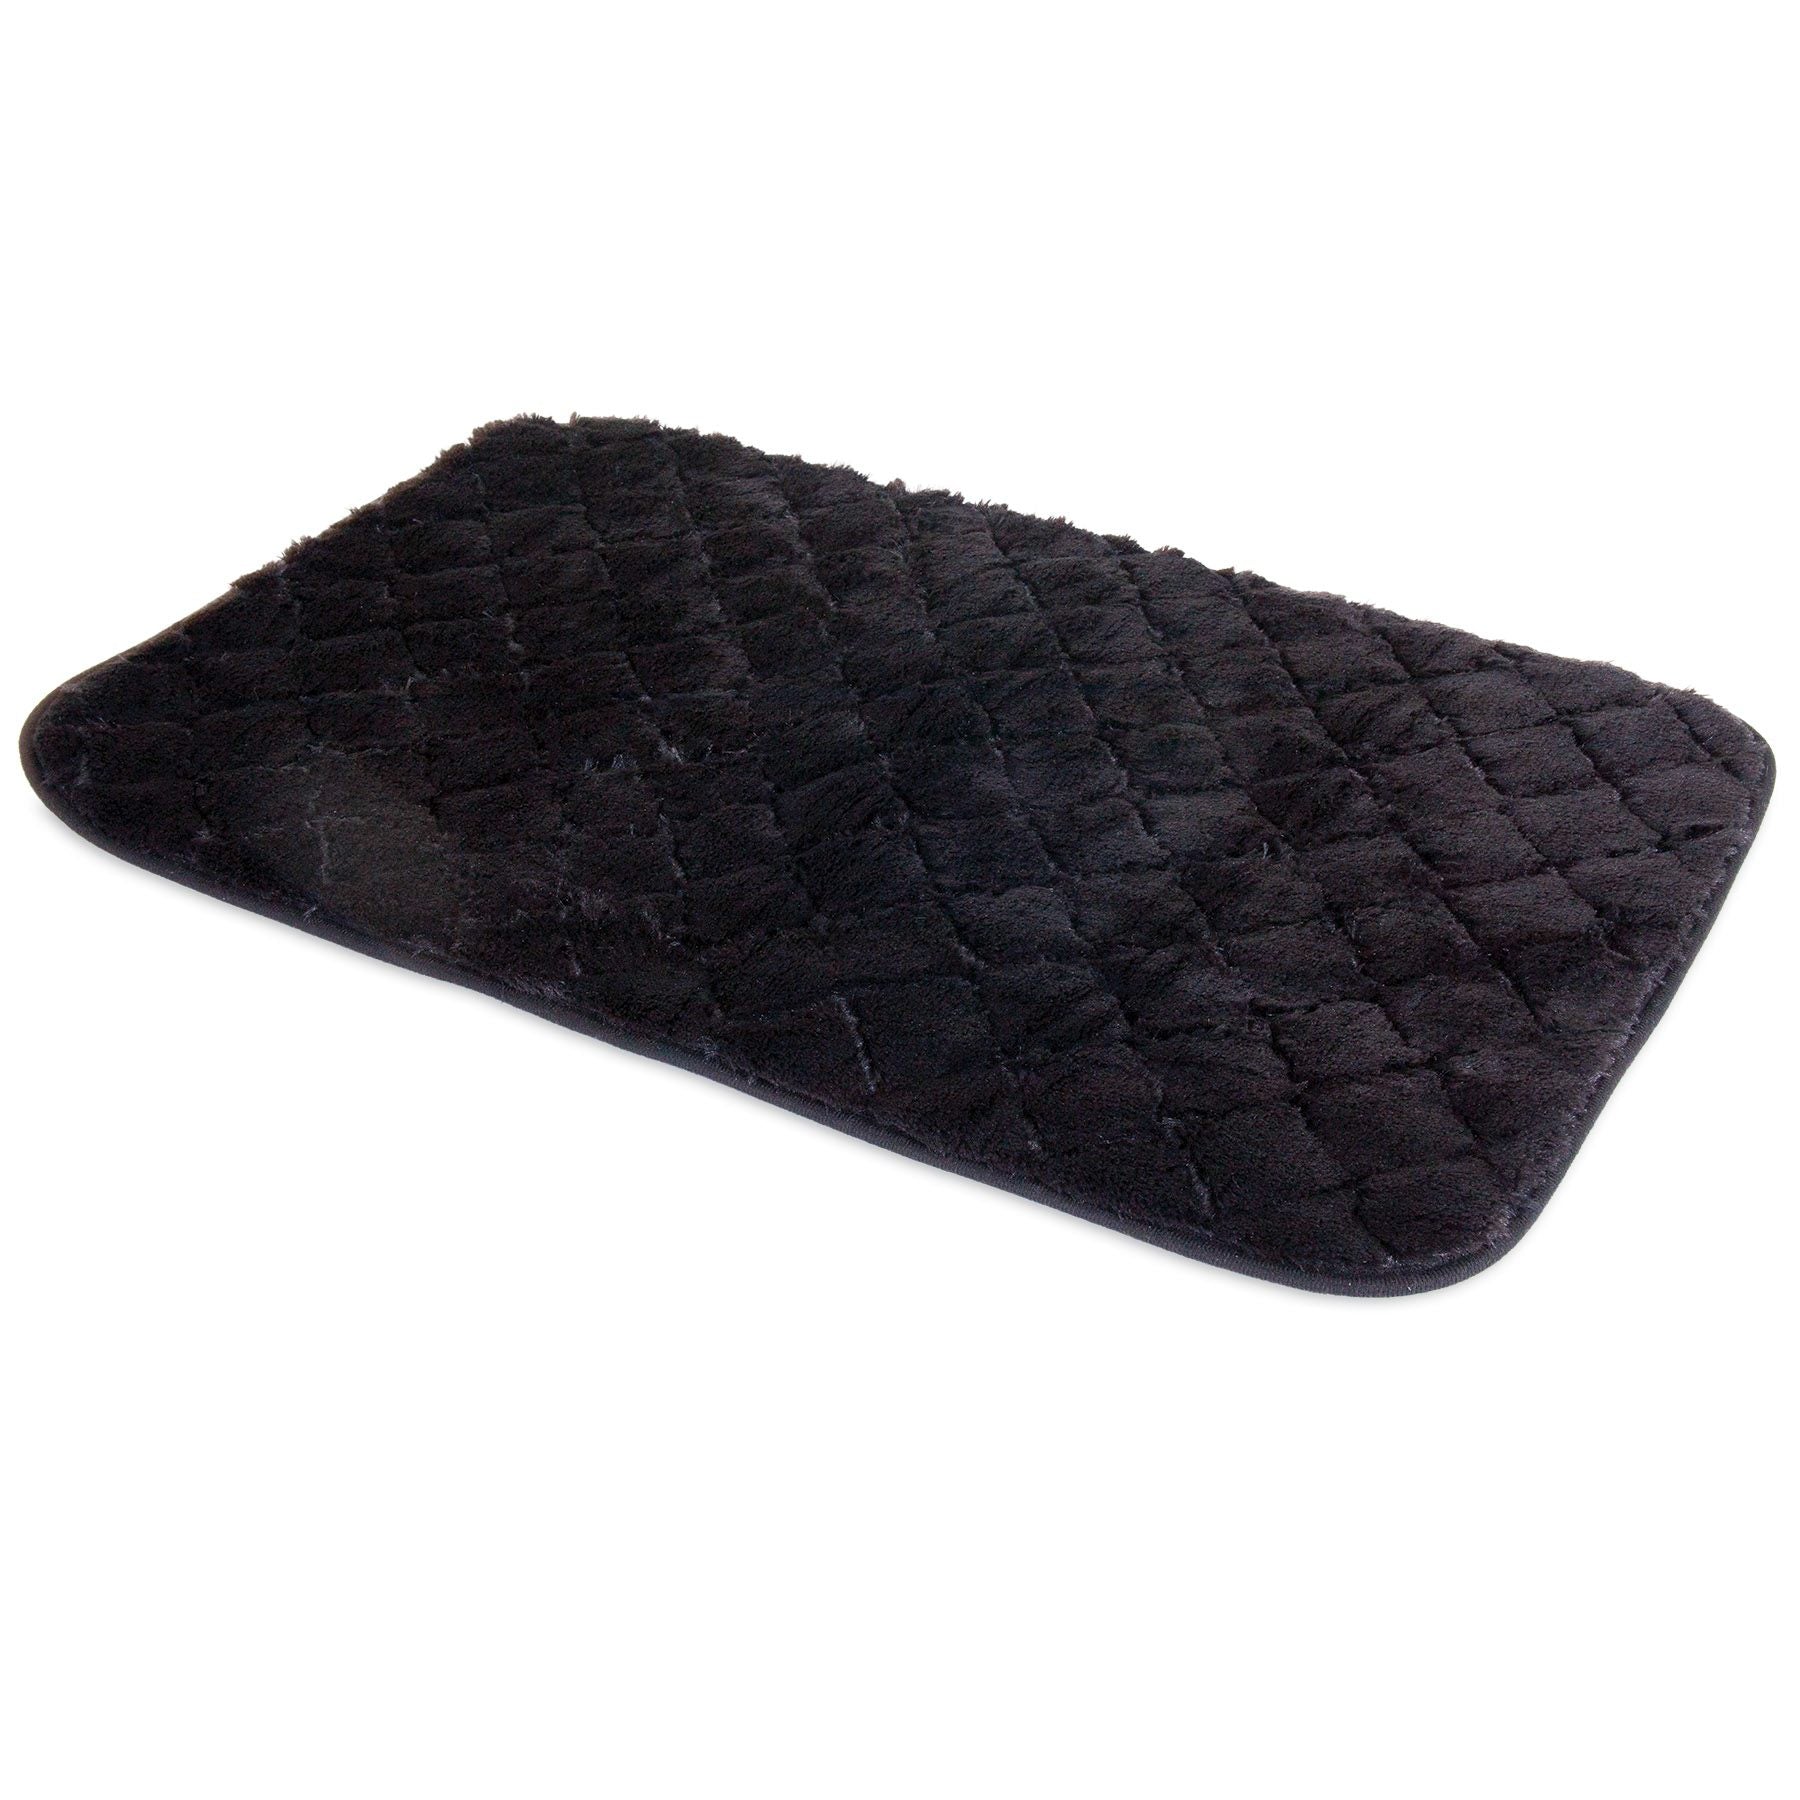 Petmate Quilted Kennel Mat - Black